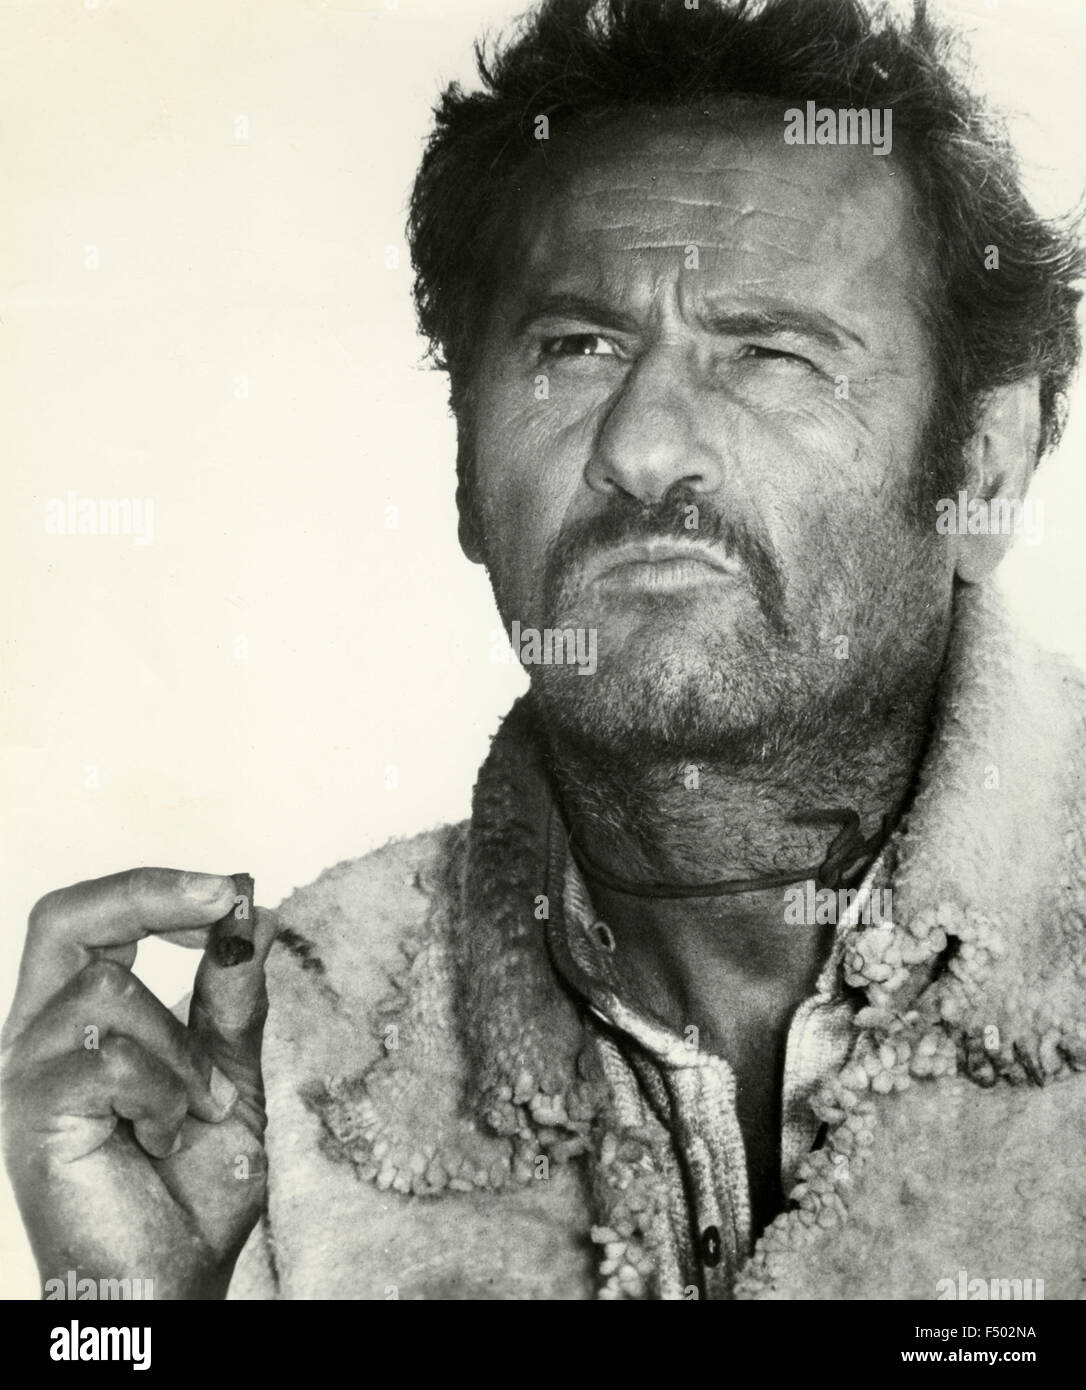 The American actor Eli Wallach in a scene from the film 'The Good, the Bad and the Ugly', Italy Stock Photo